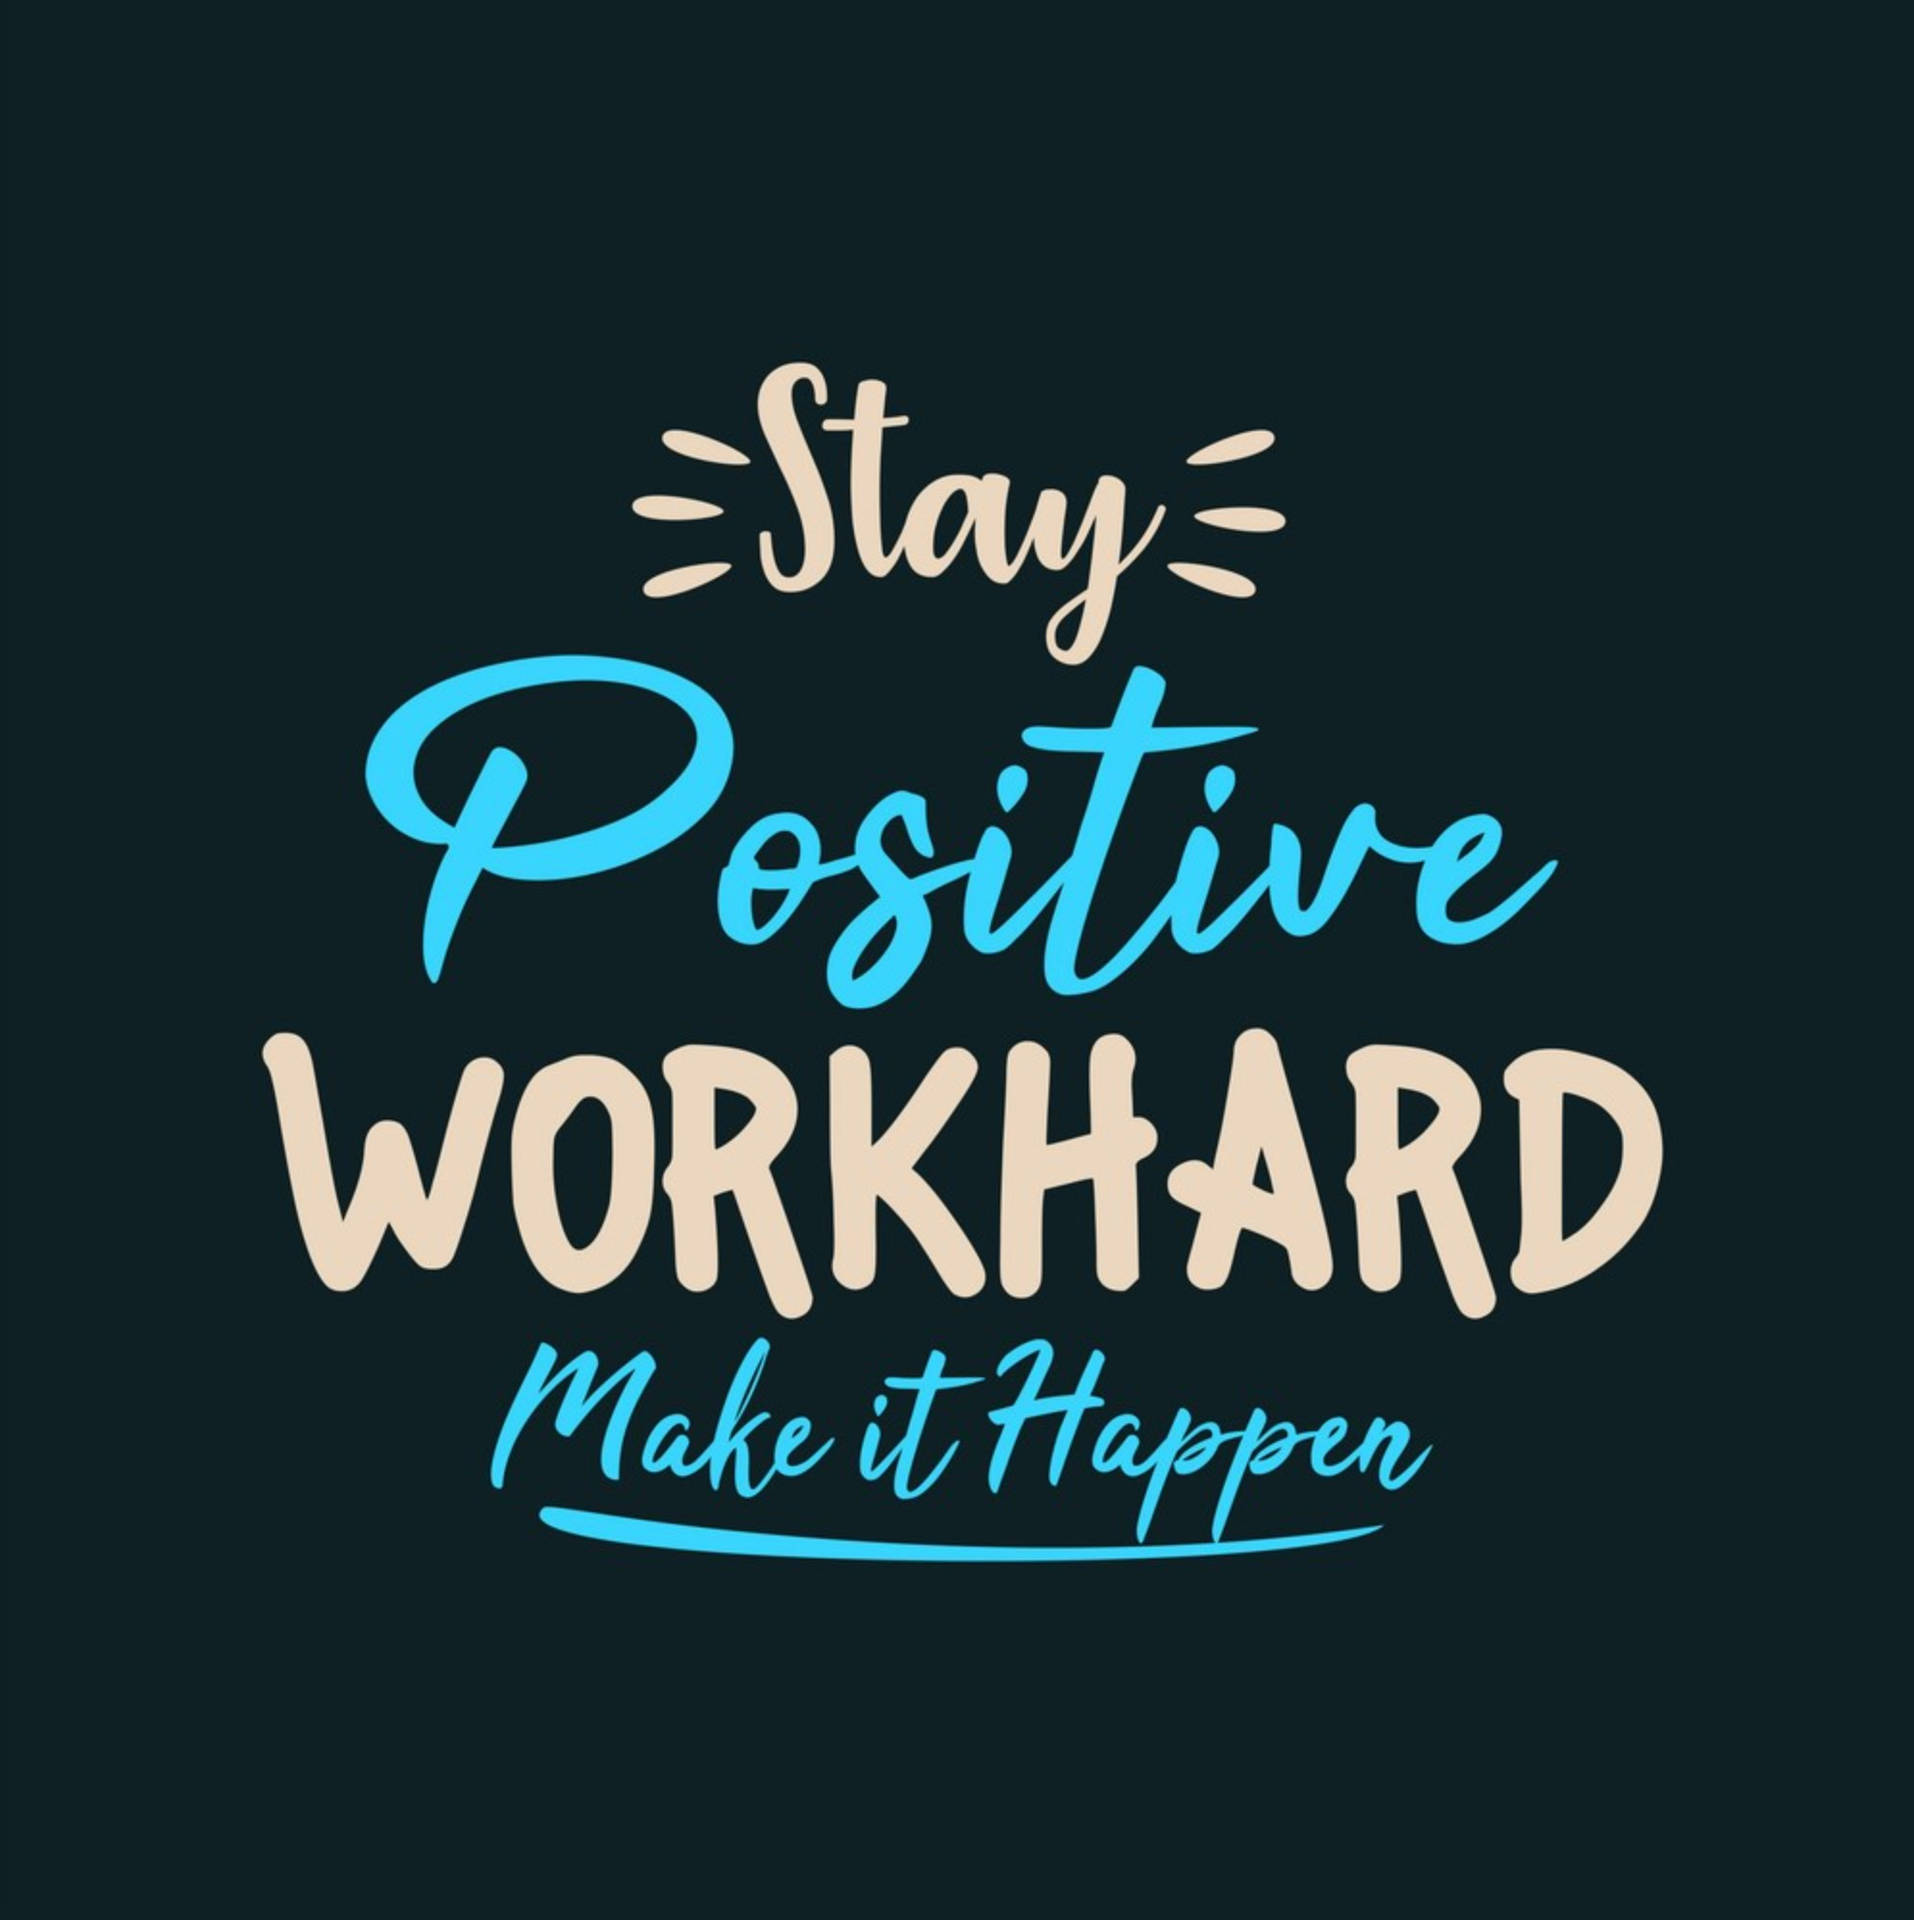 Free Positive Quotes Wallpaper Downloads, [300+] Positive Quotes Wallpapers  for FREE 